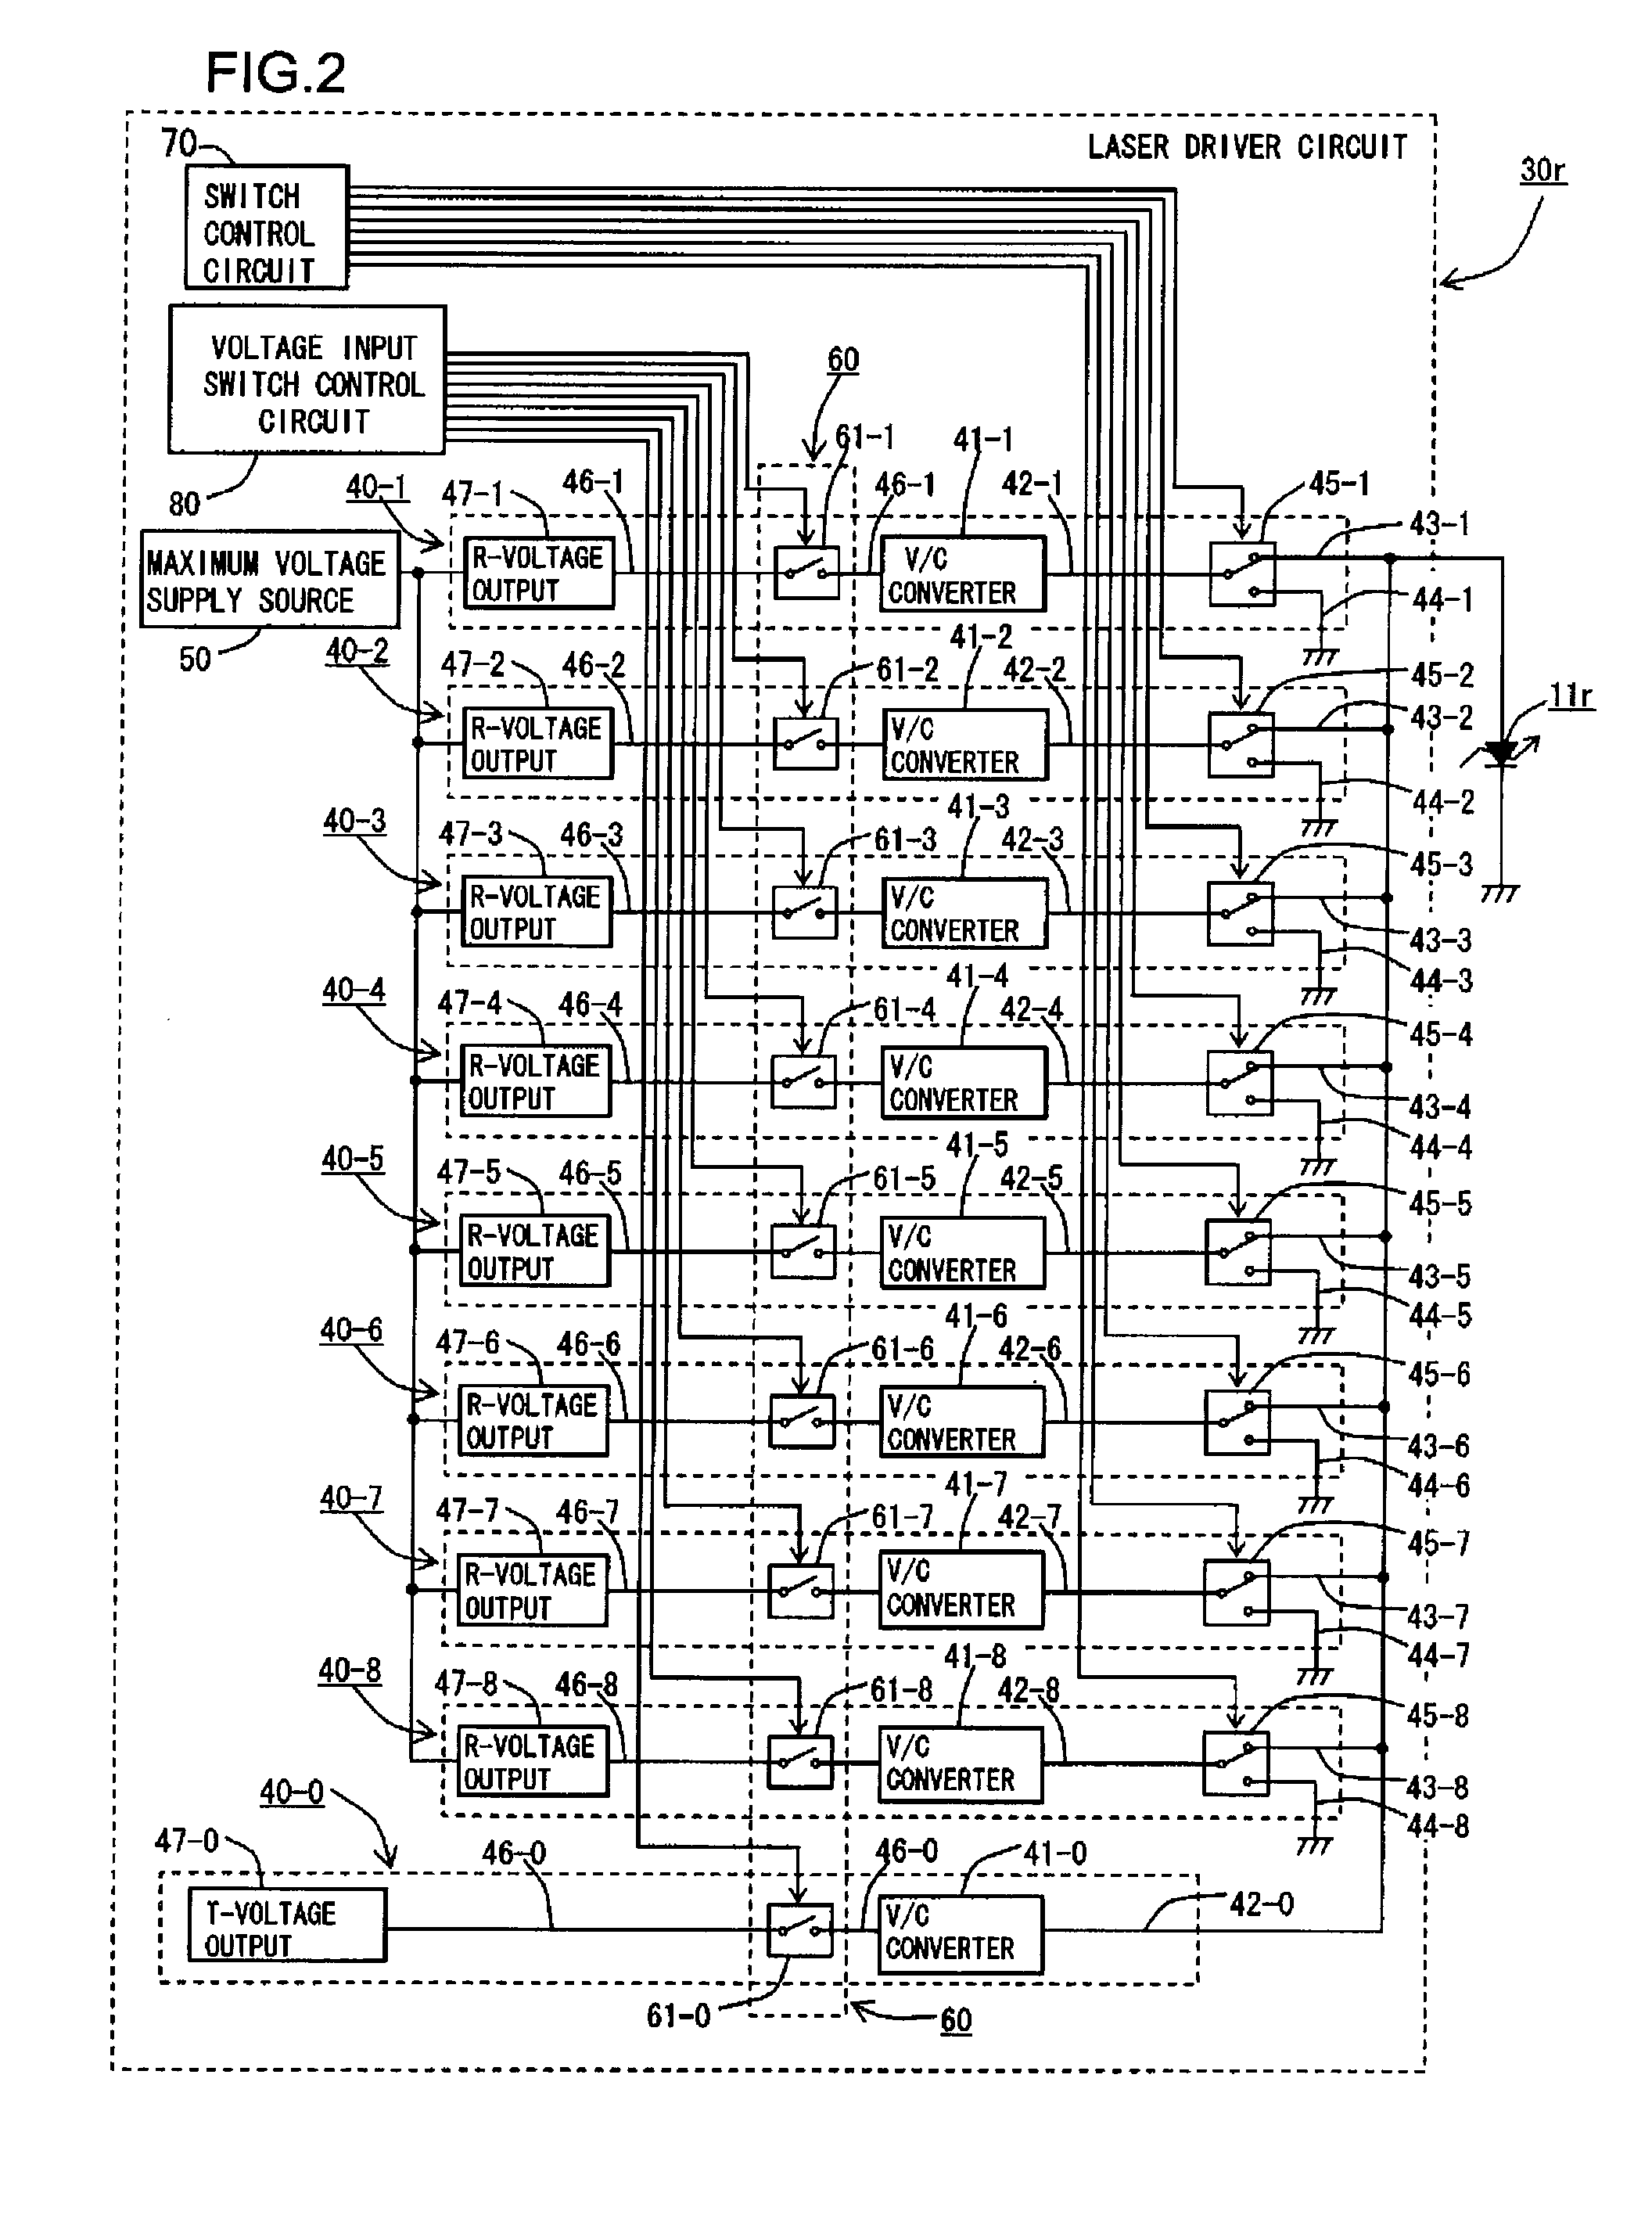 Laser driver circuit and laser display